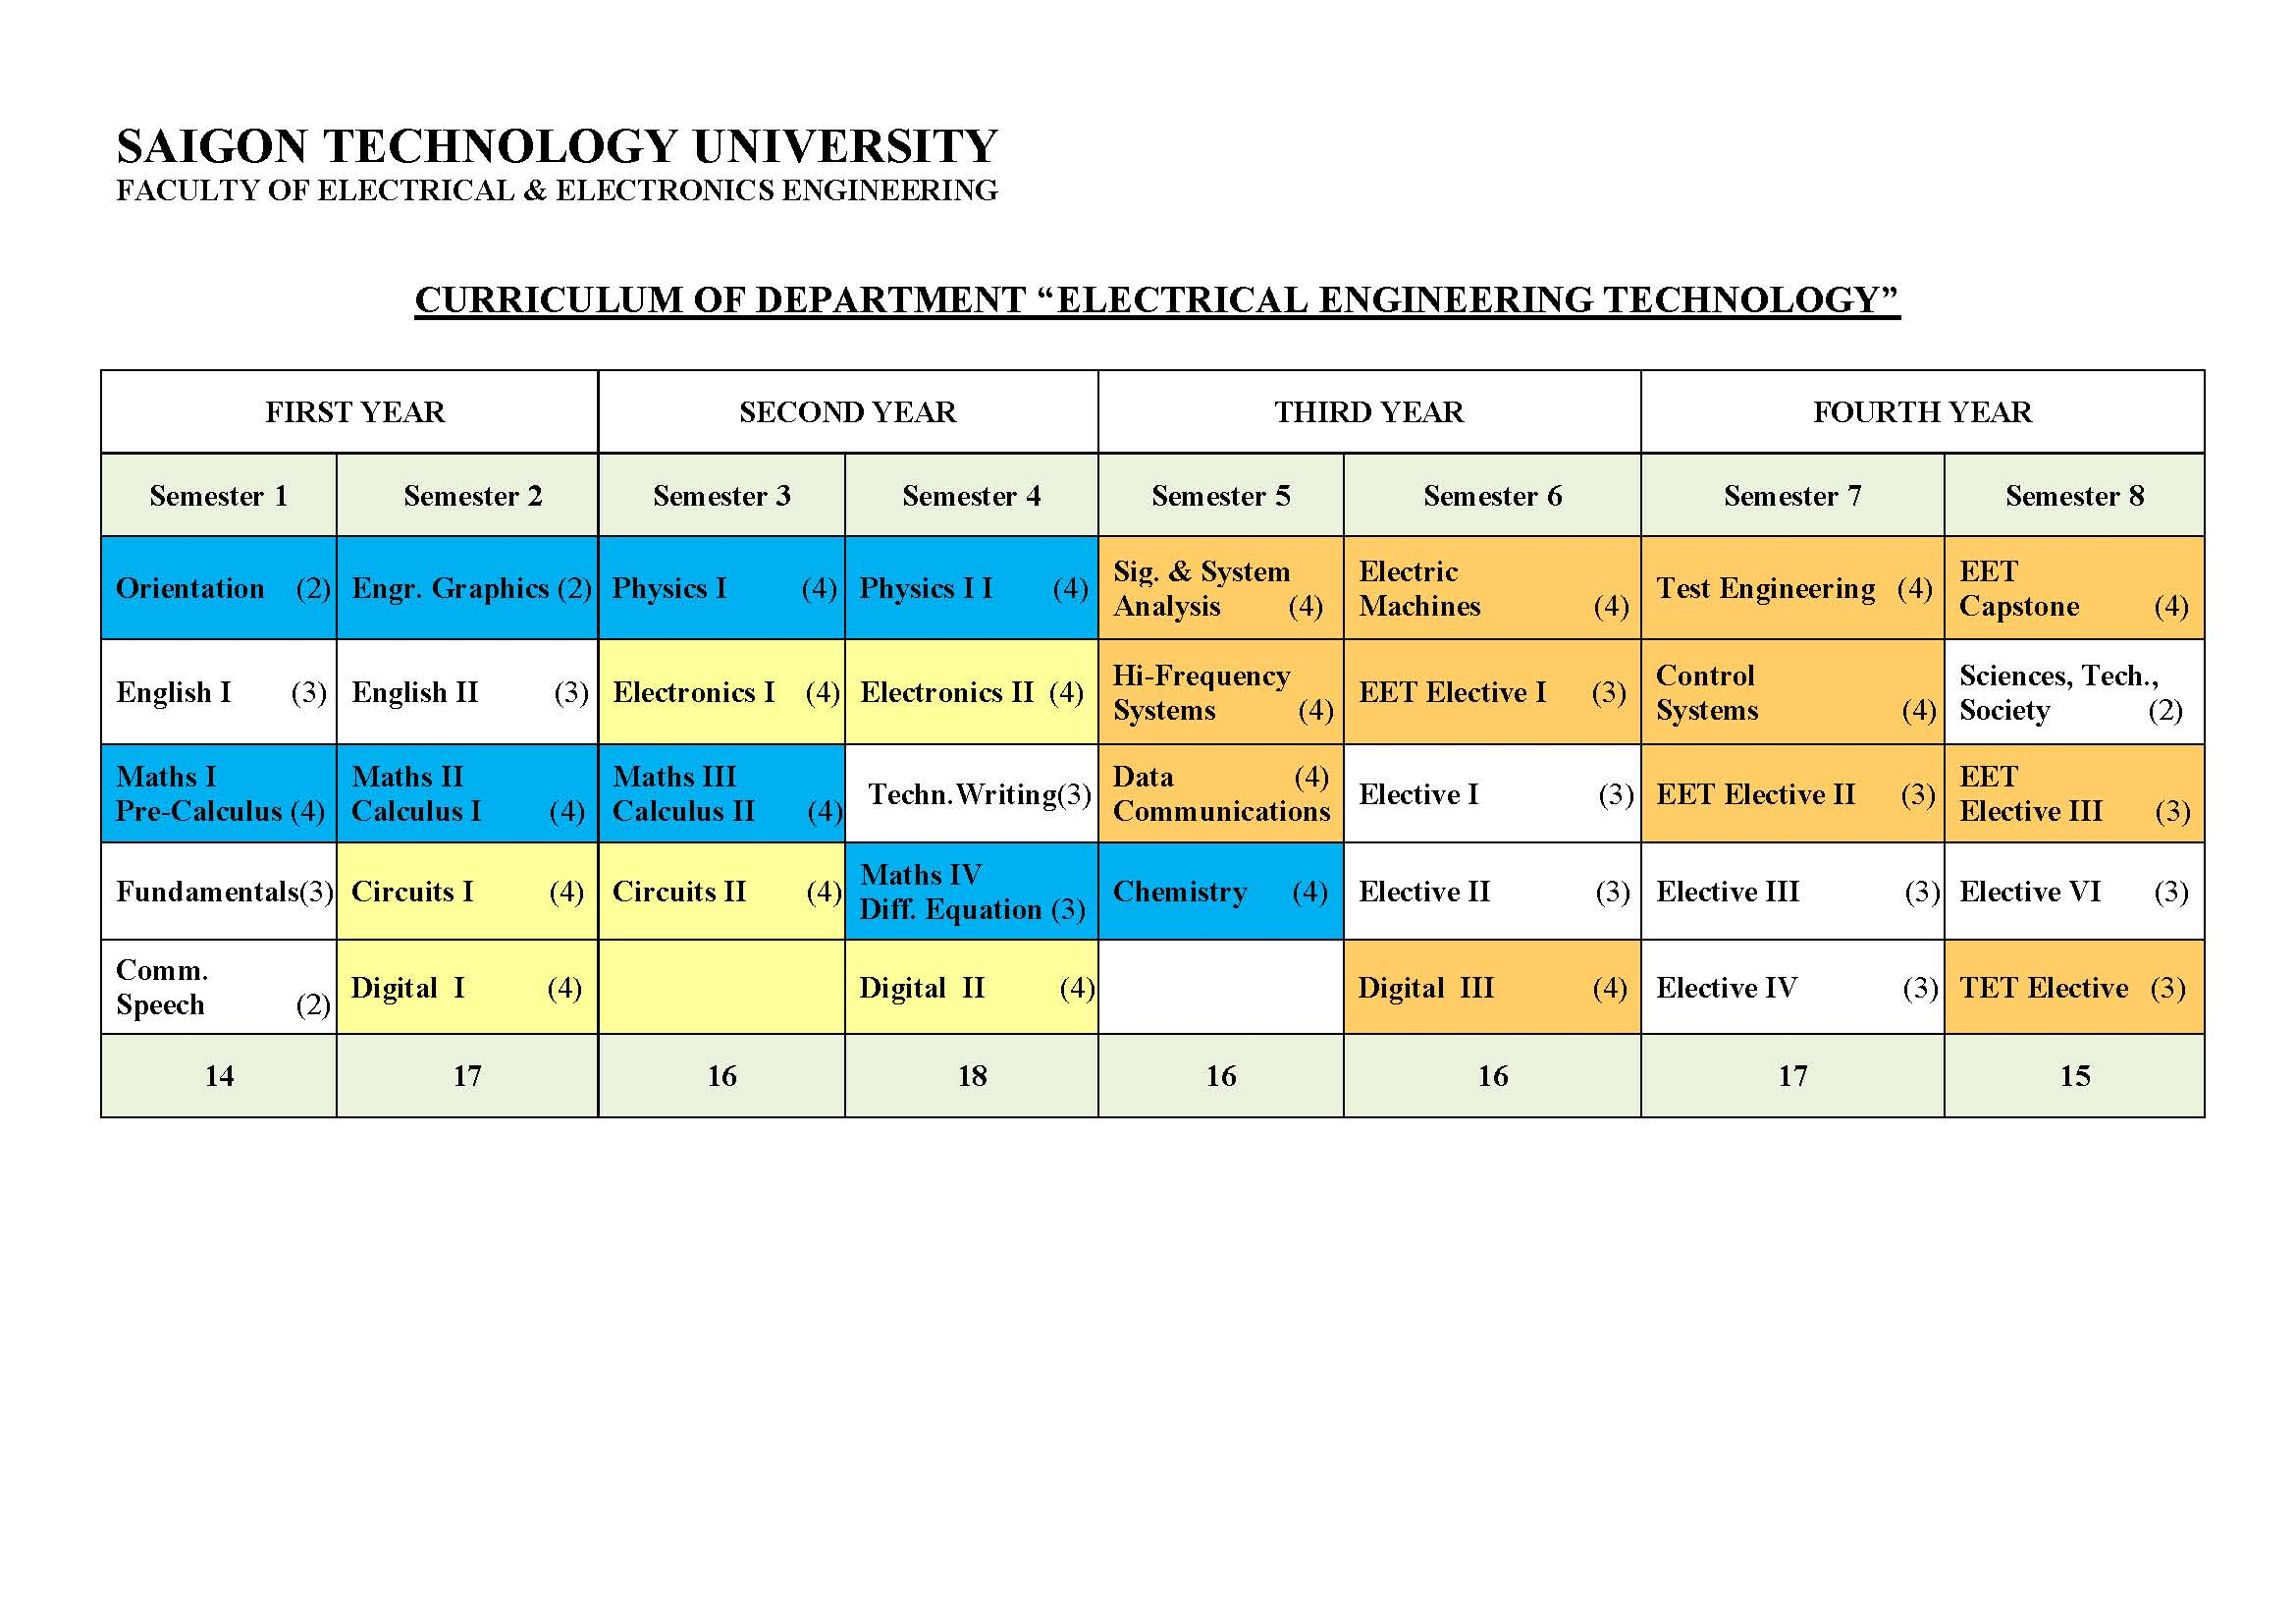 Curriculum of department “Electrical Engineering Technology”